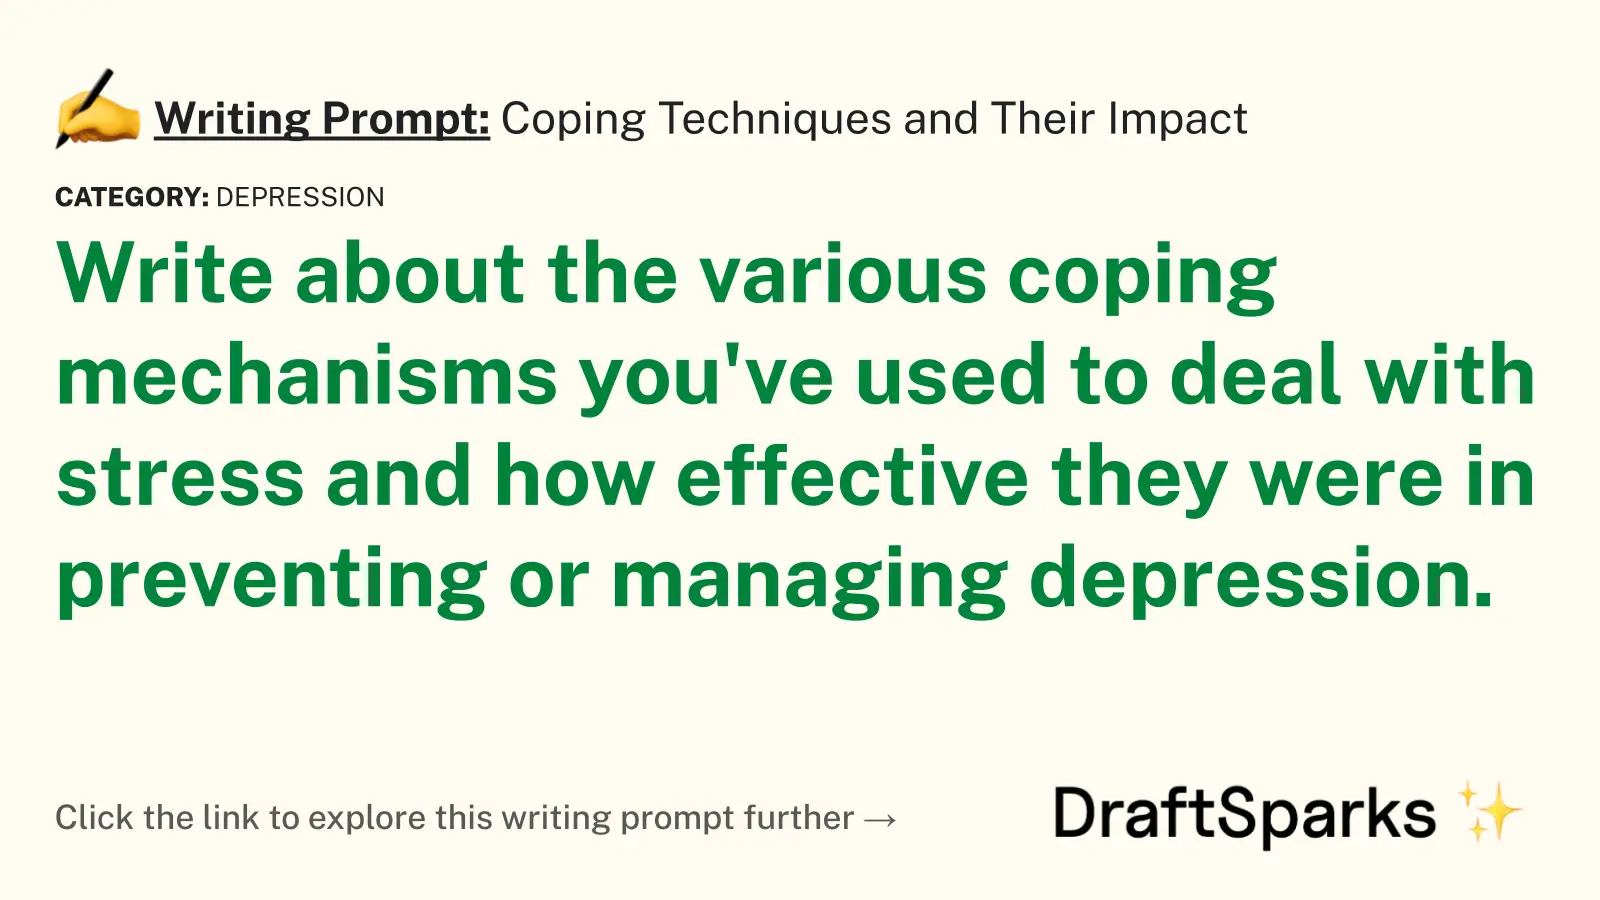 Coping Techniques and Their Impact